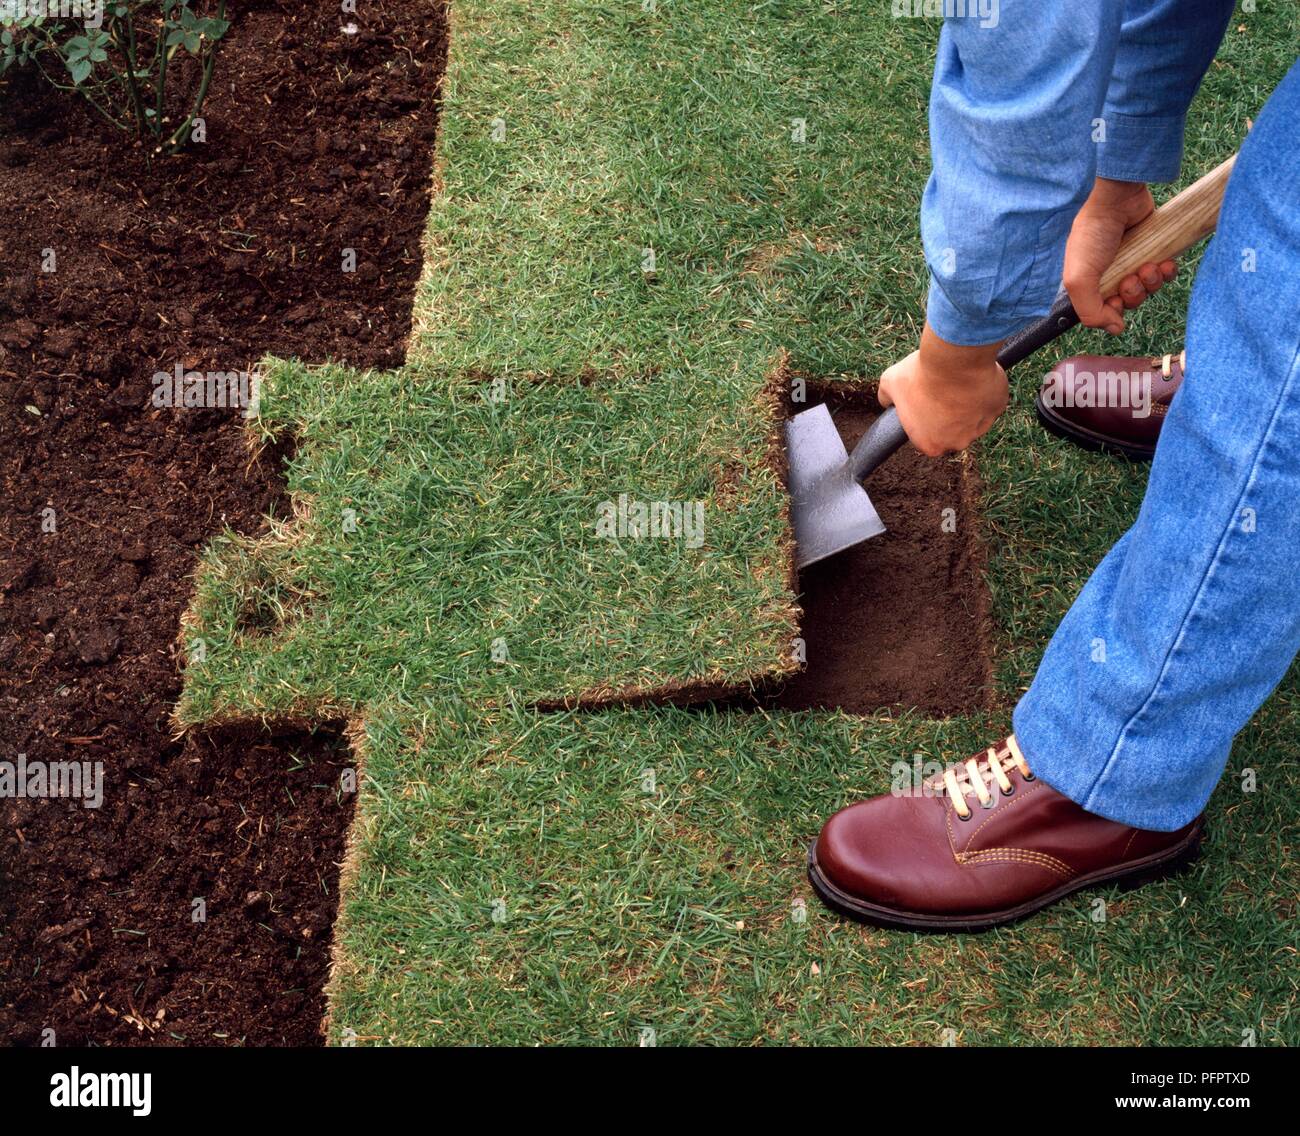 Person removing cut-out section of damaged turf with spade Stock Photo